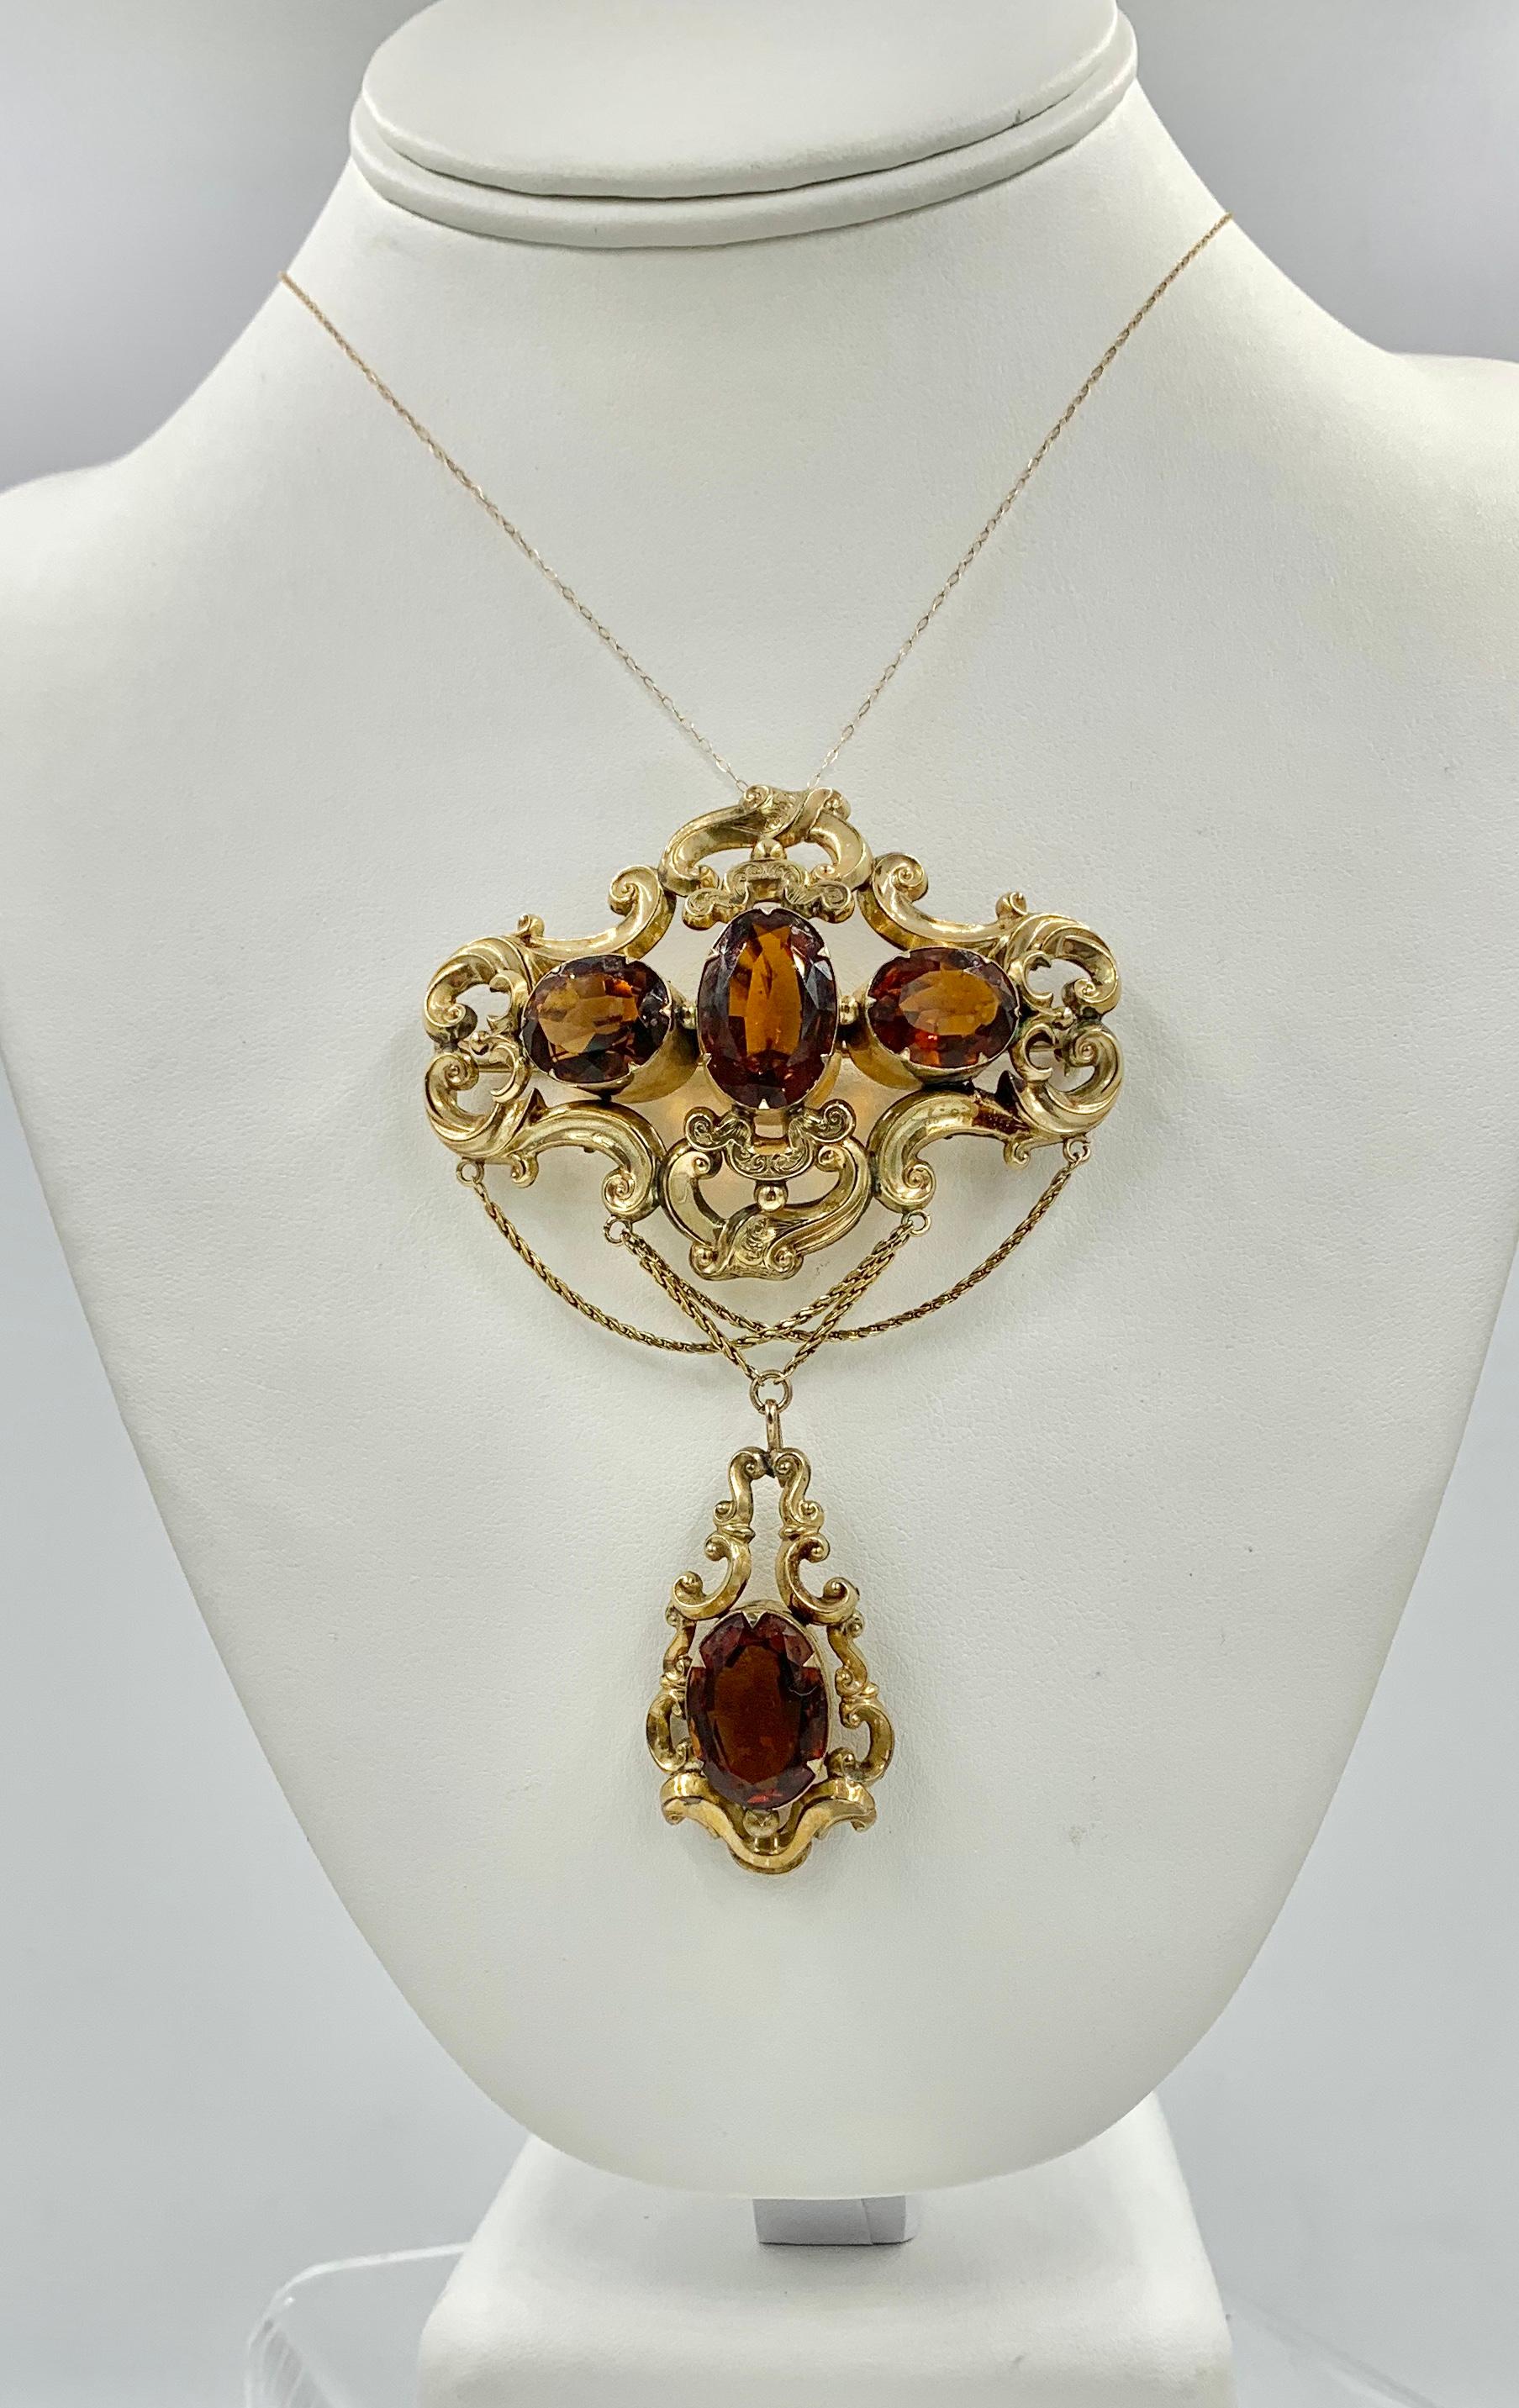 This is a spectacular antique Victorian - Belle Epoque Pendant Brooch with 30 Carats of Magnificent Citrine gems set in a stunning open work acanthus scroll swag design in 10-12 Karat Gold.  The pendant is a monumental size, 4 1/8 inches long, which